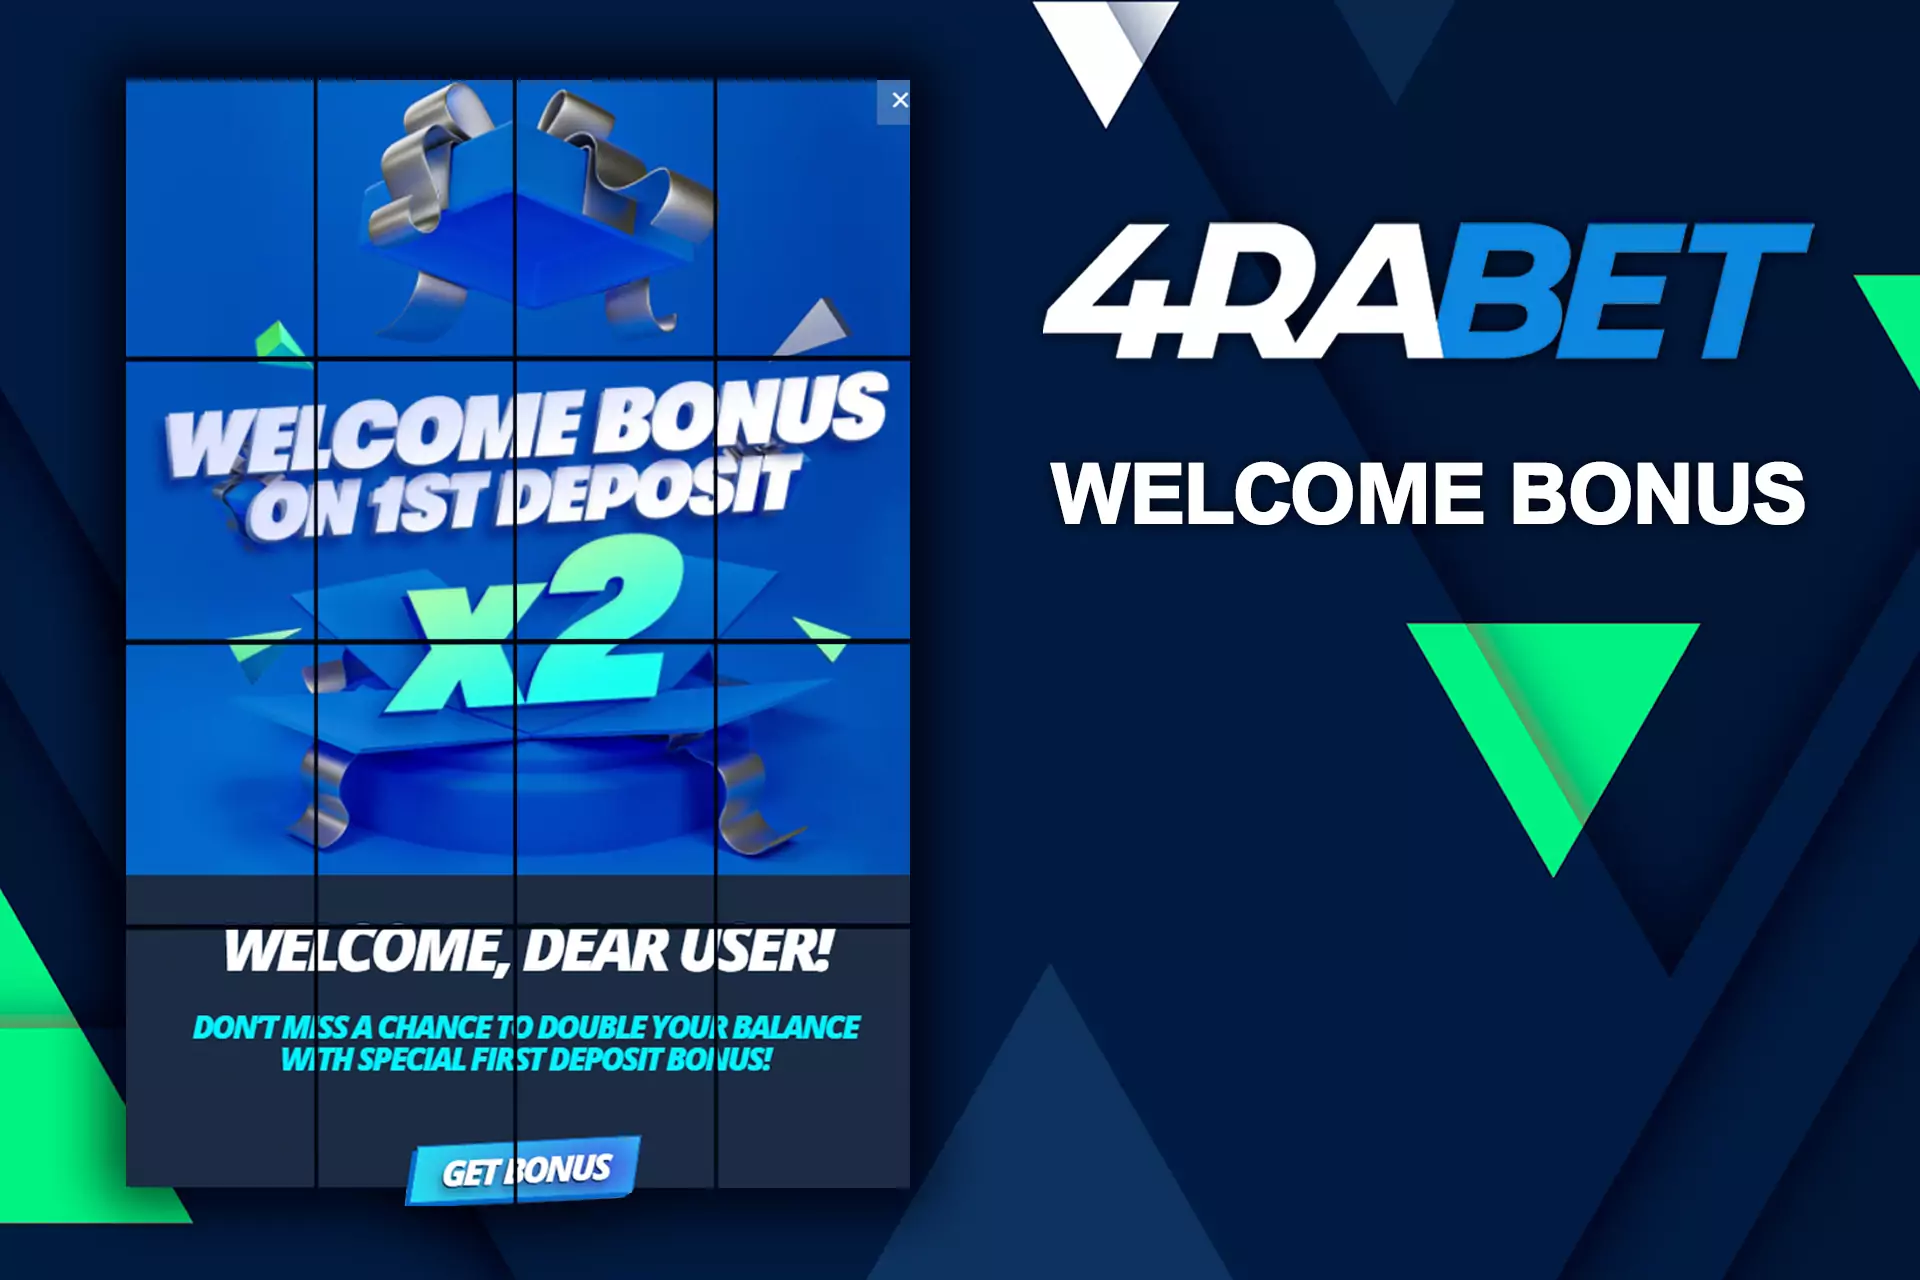 If you are a new user on the 4rabet you should try to get the welcome bonus during registration.